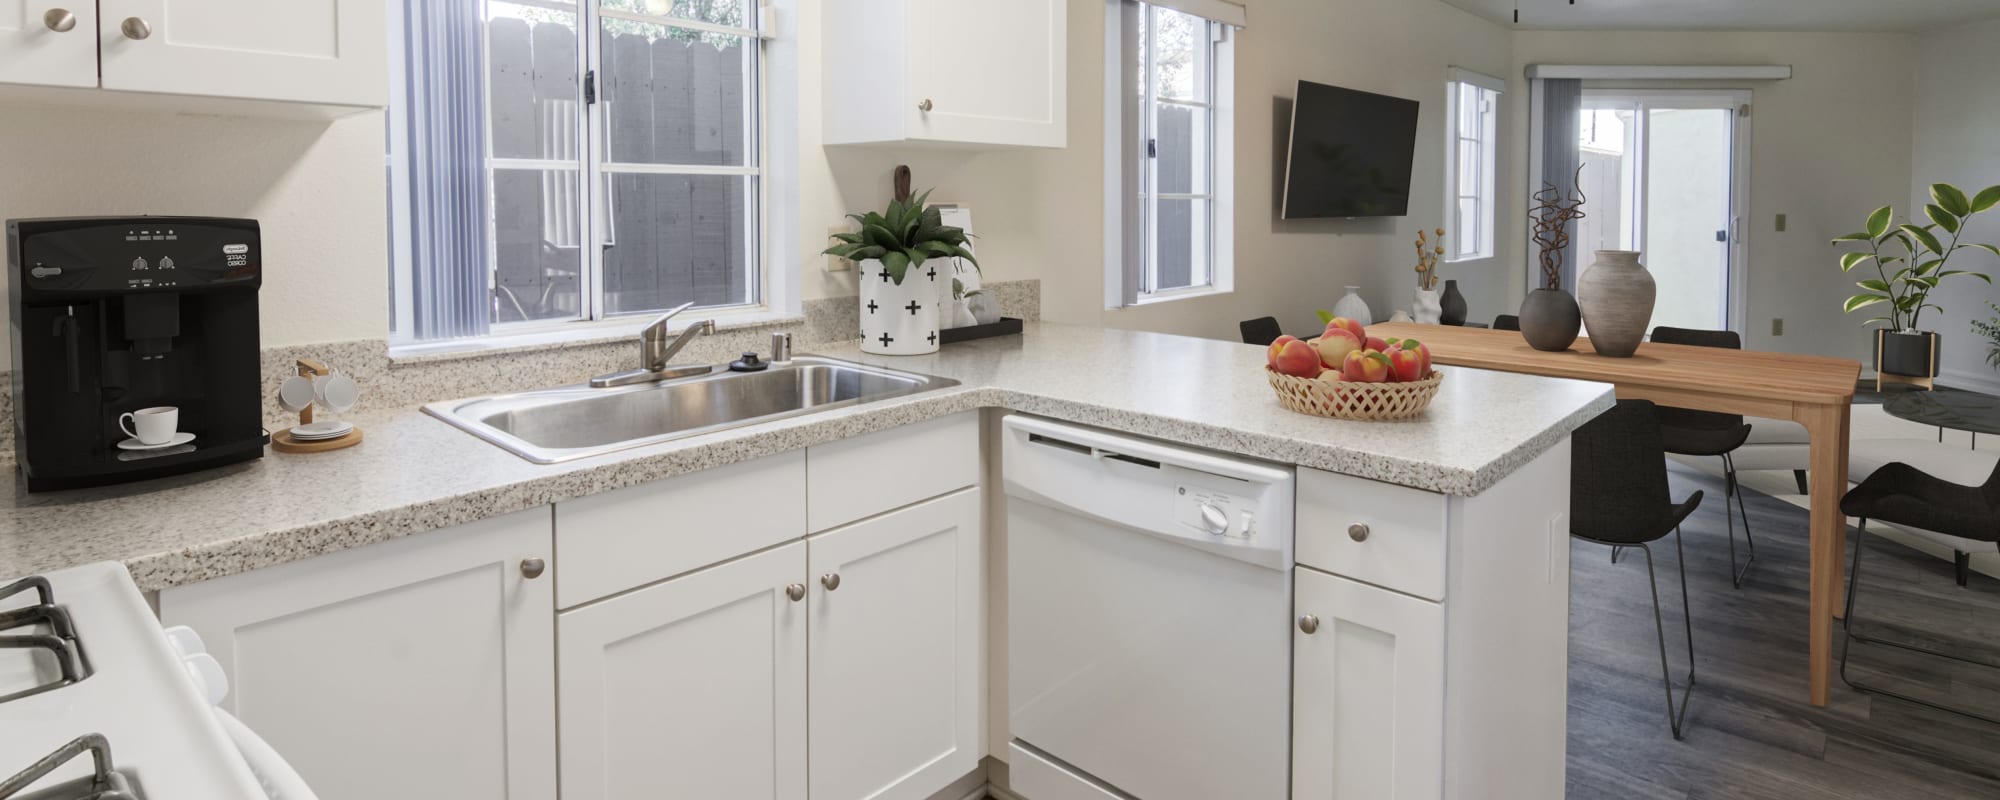 Kitchen with white appliances and white cabinets